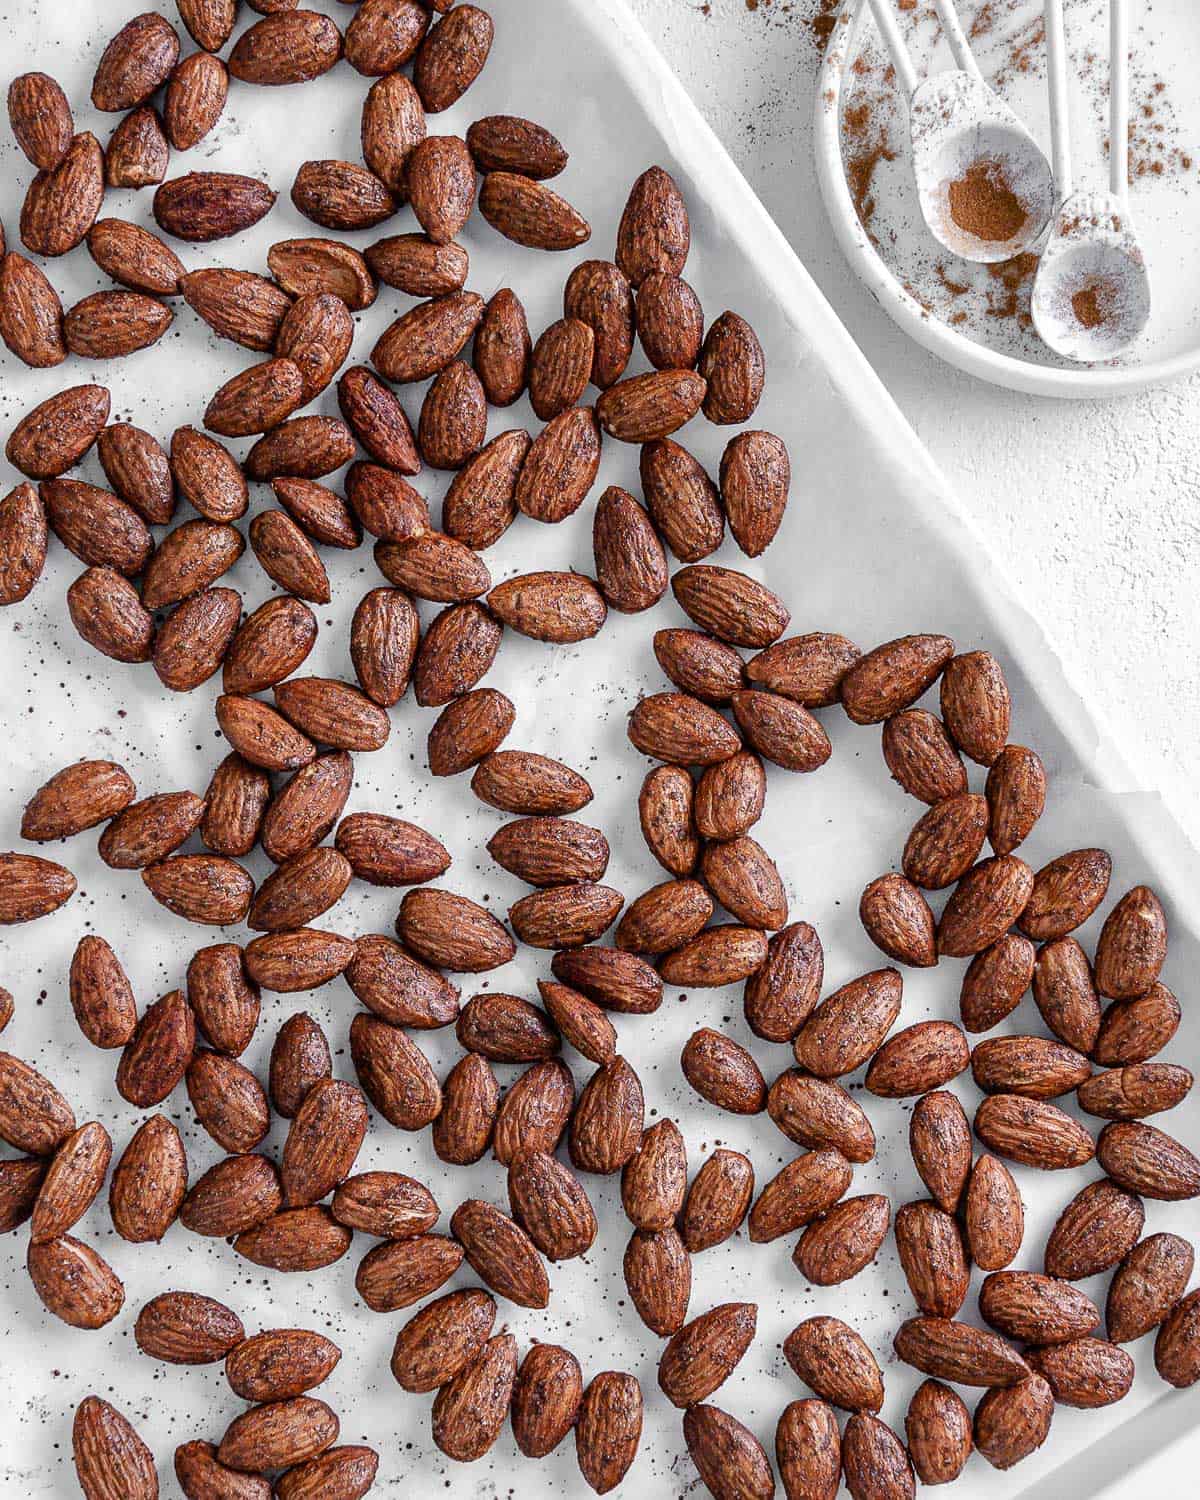 completed cinnamon almonds against a white surface